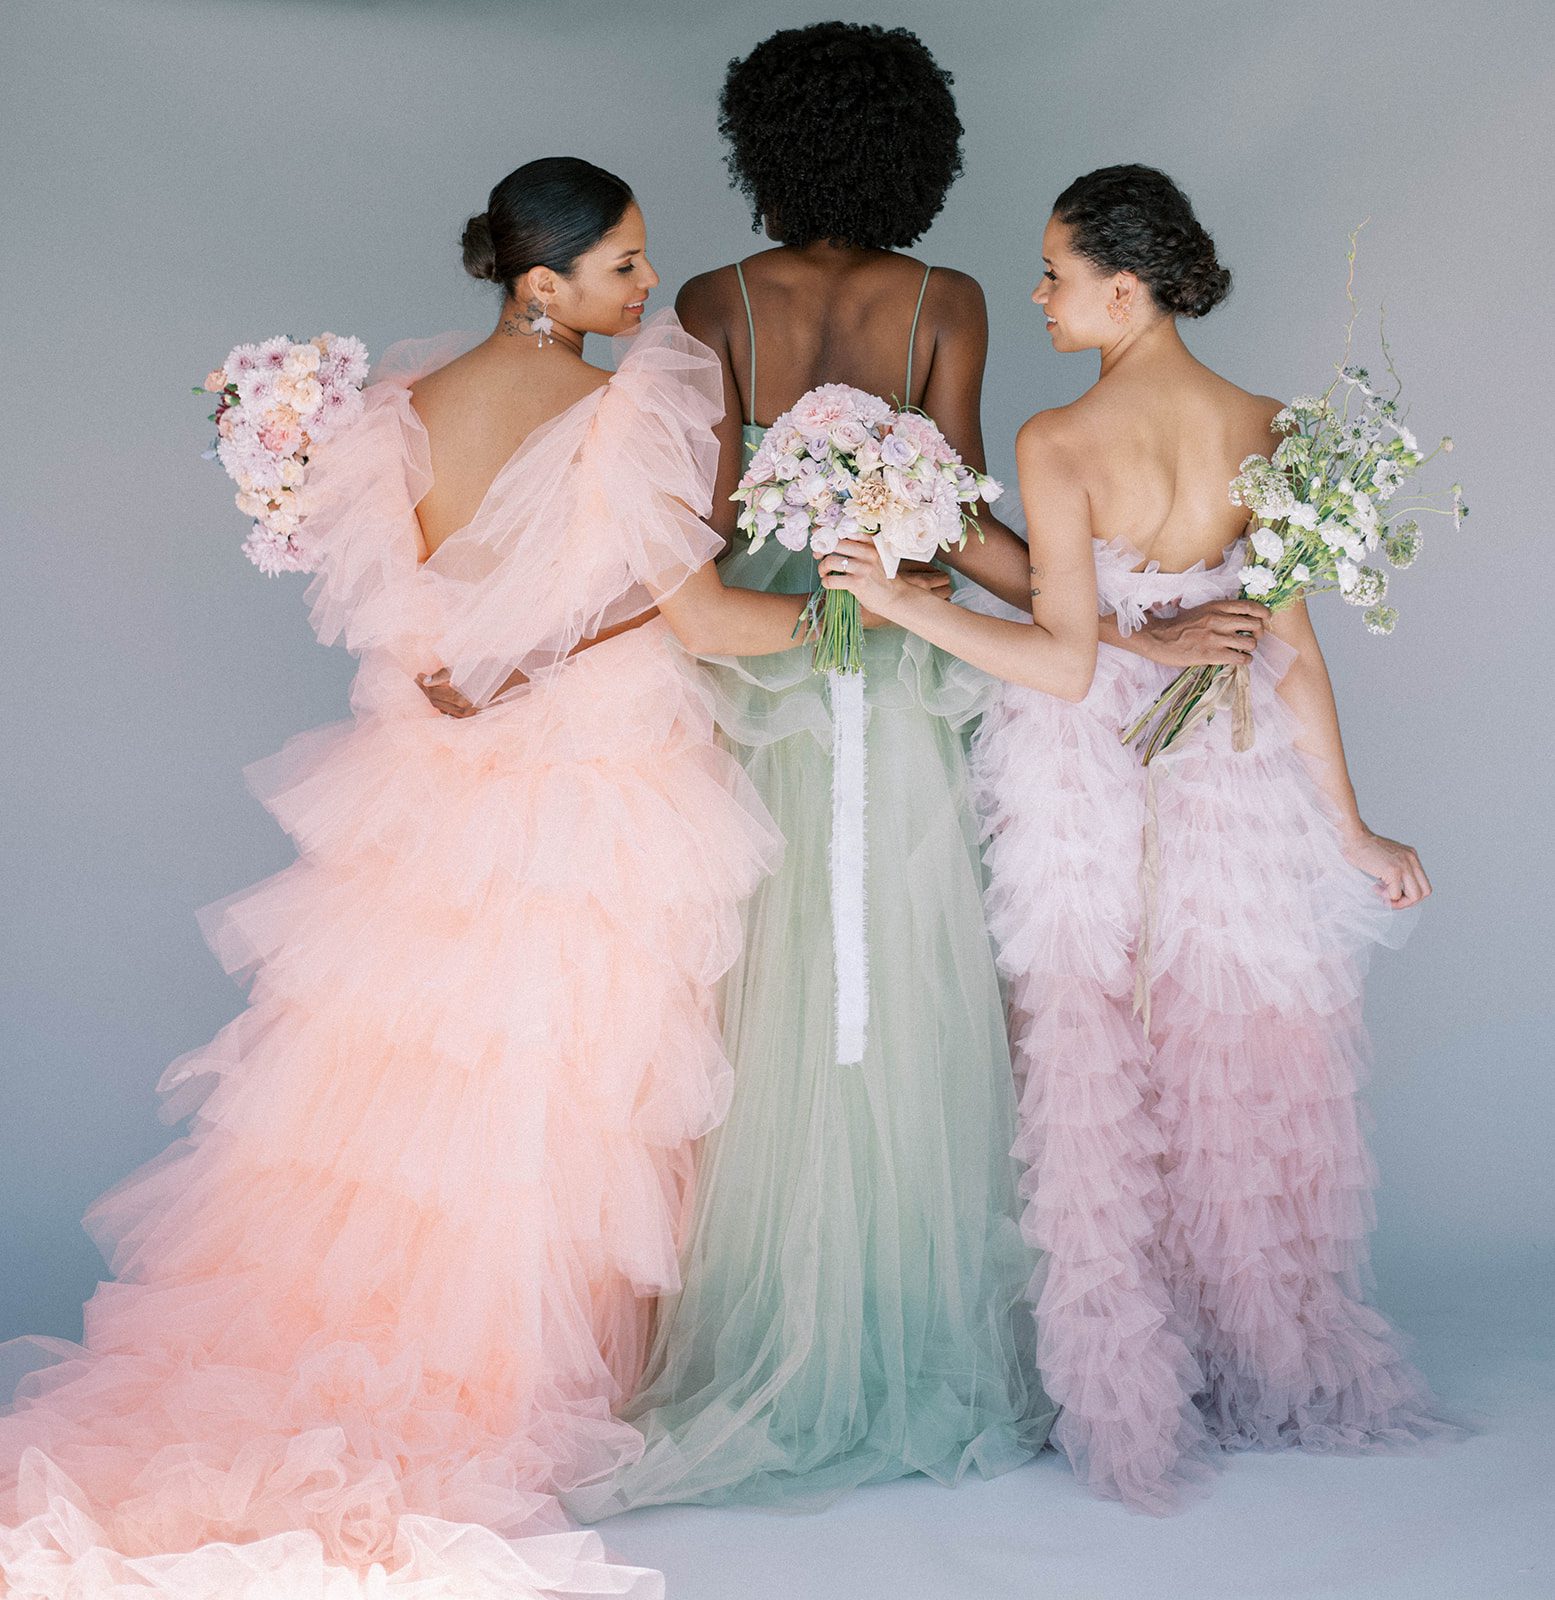 three bride standning together and facing away from the camera to show off the back of their dresses, all three are wearing different colored wedding dresses for a Tampa Florida colorful bridal fashion wedding shoot